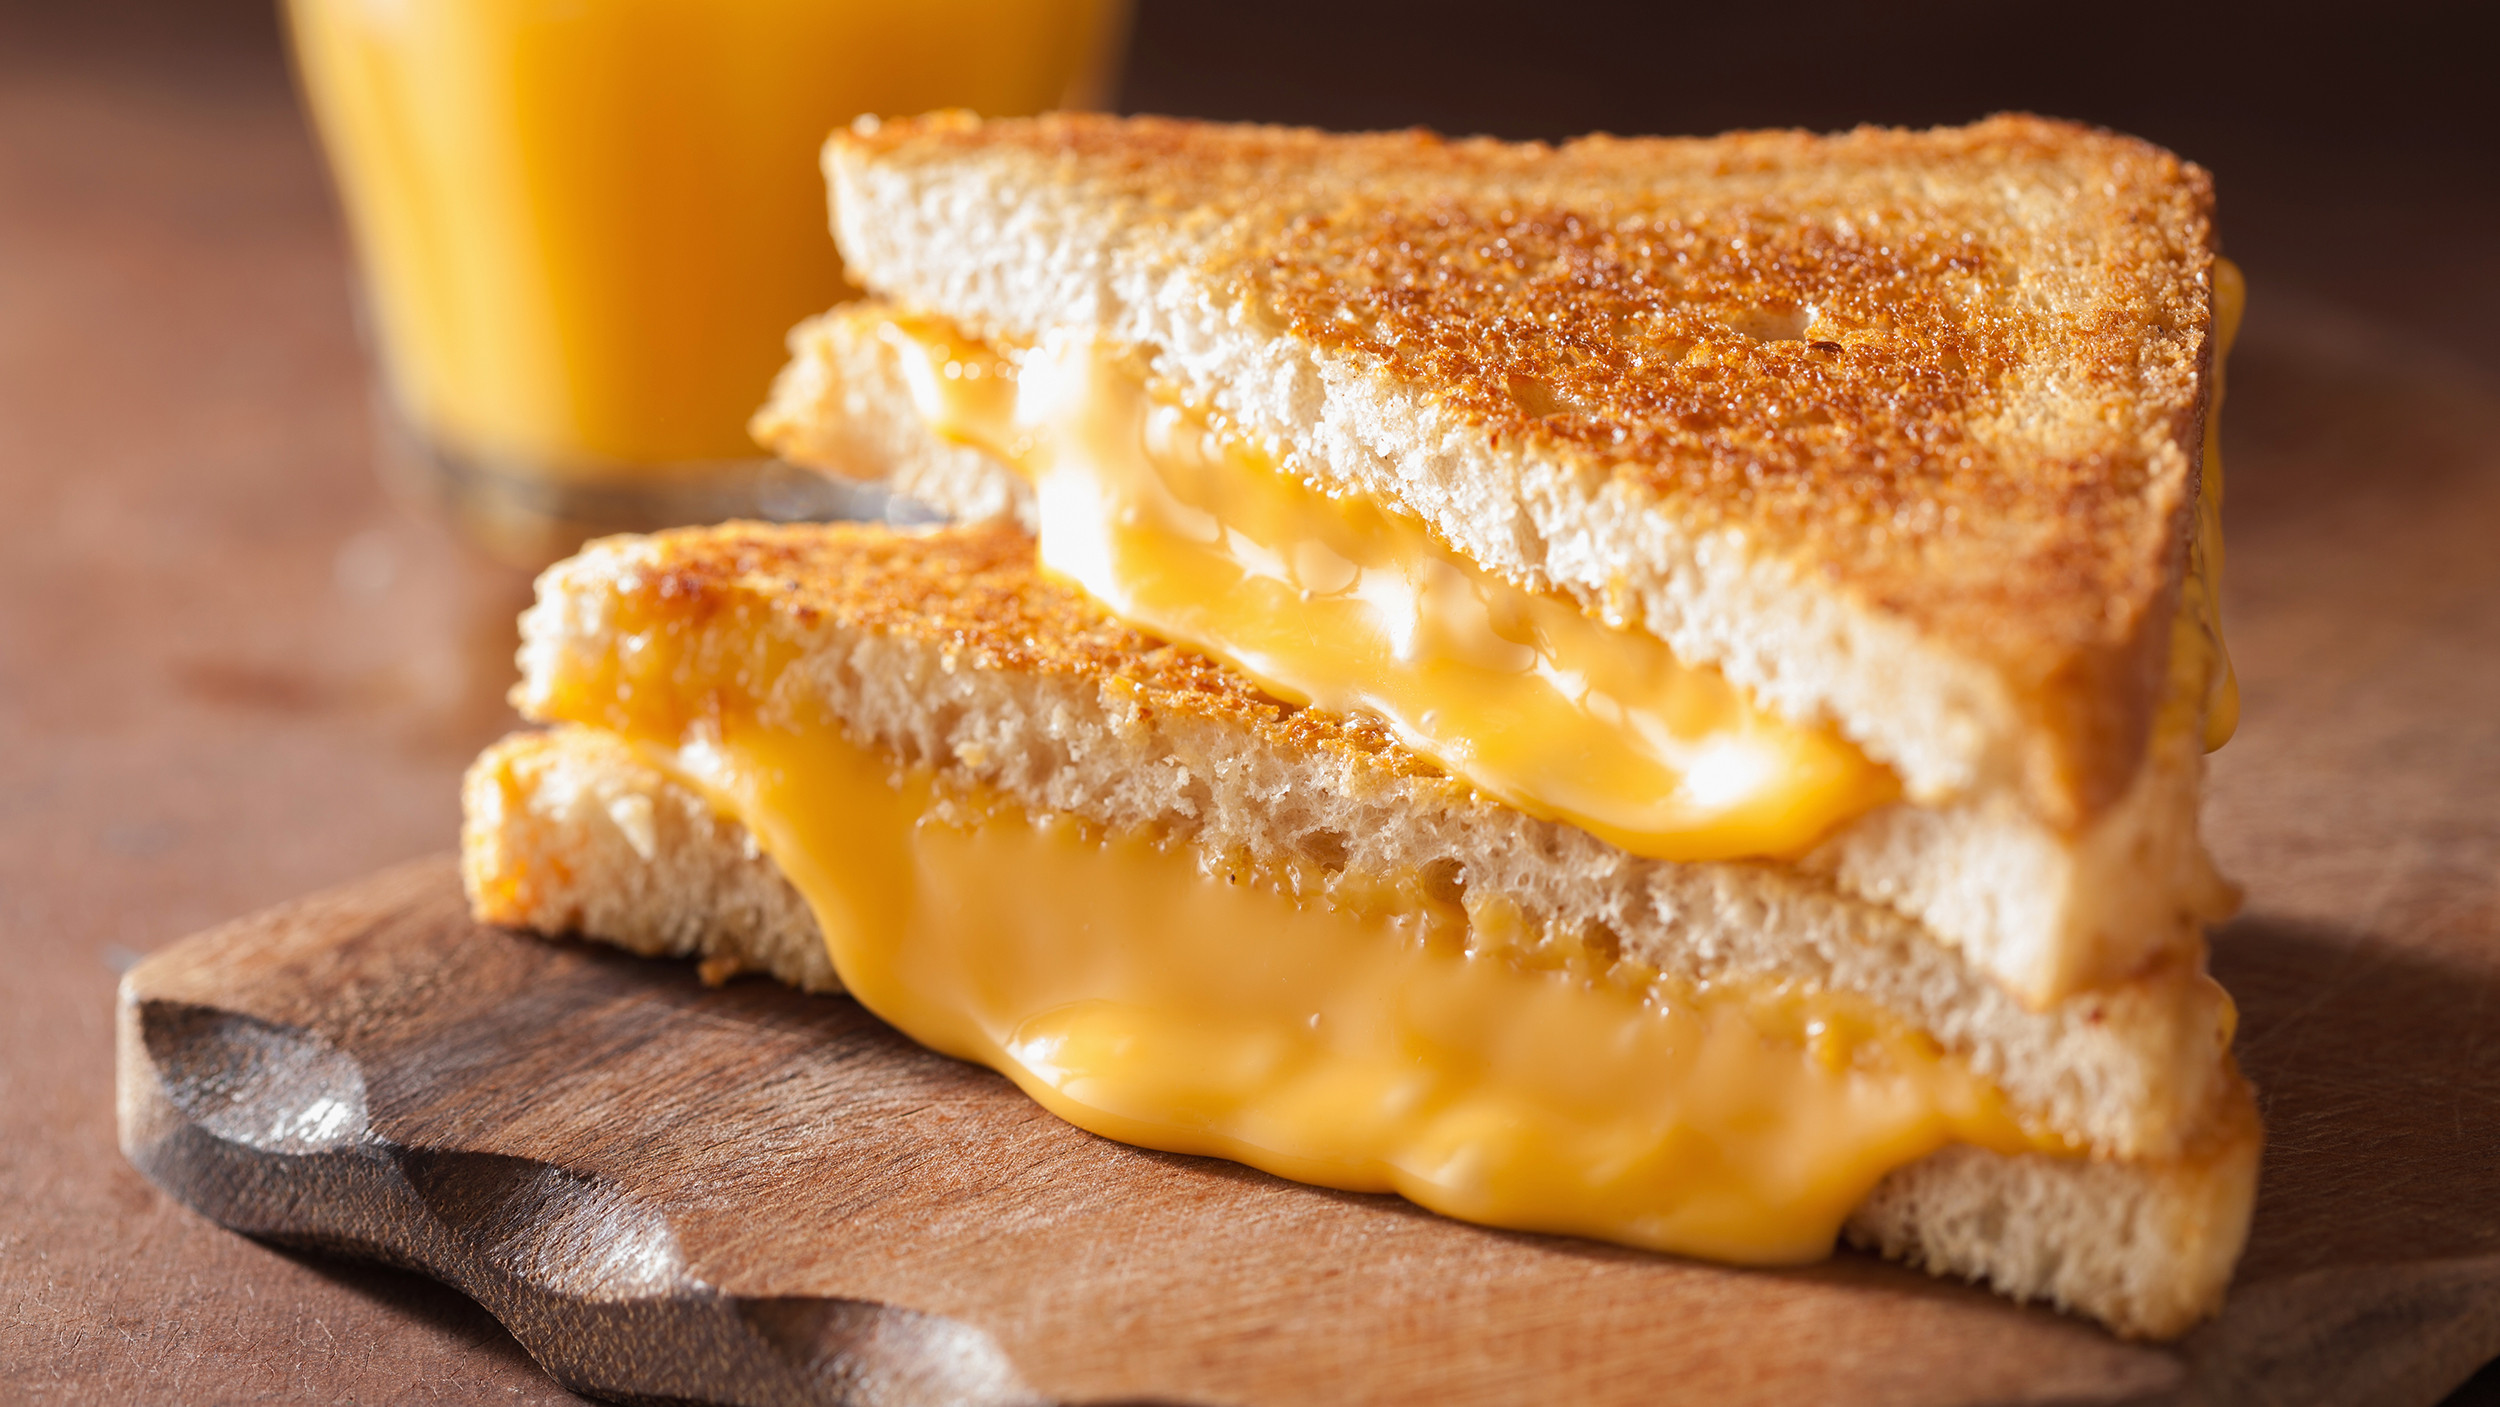 Best Cheese For Grilled Cheese Sandwiches
 8 tips for making the perfect grilled cheese sandwich